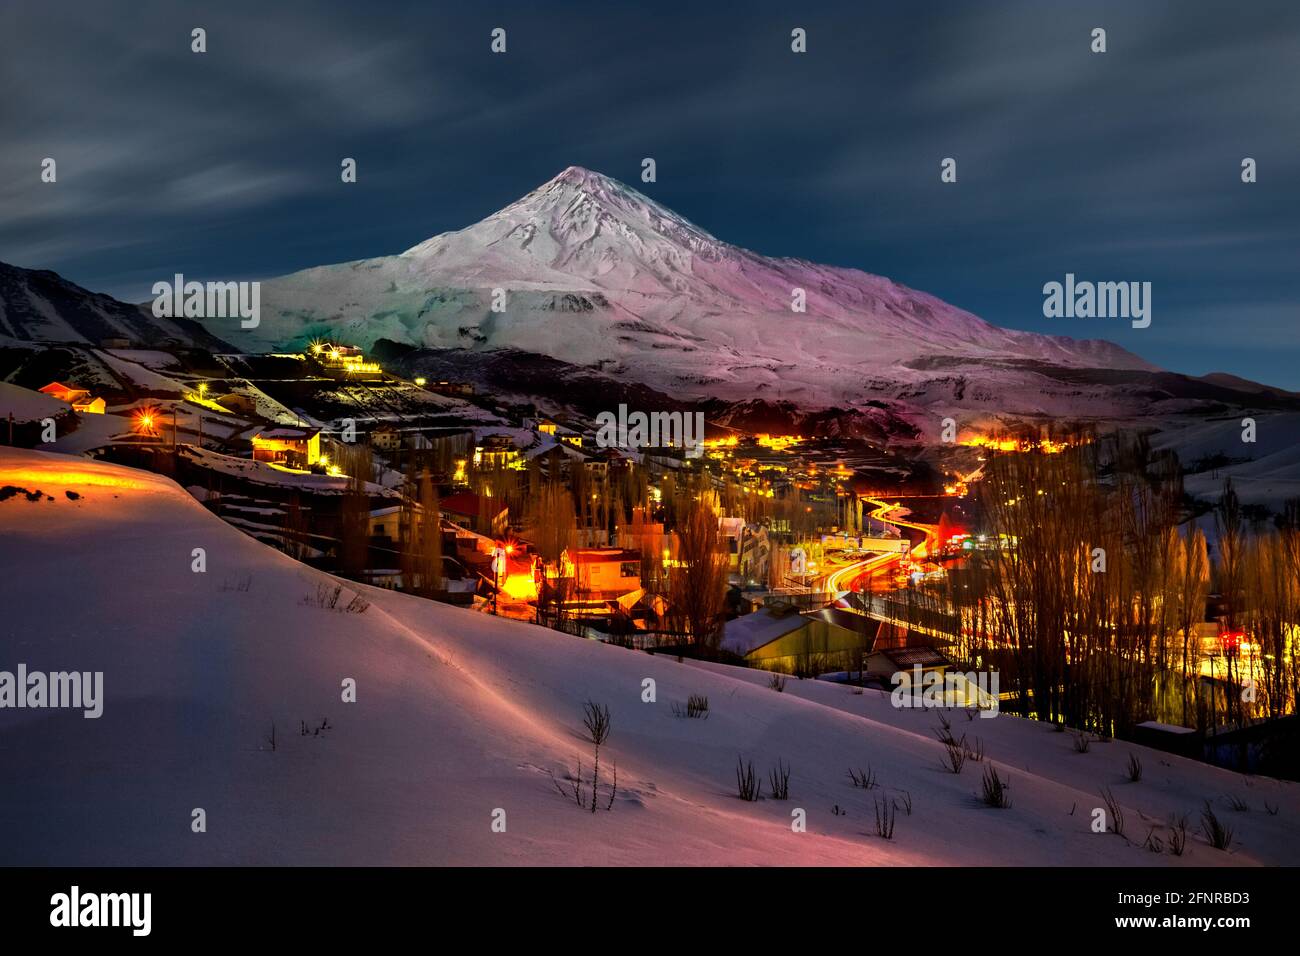 The night view of Mount Damavand from polour in Mazandaran province of Iran. Mt Damavand is the highest peak in Iran and the highest volcano in Asia. Stock Photo